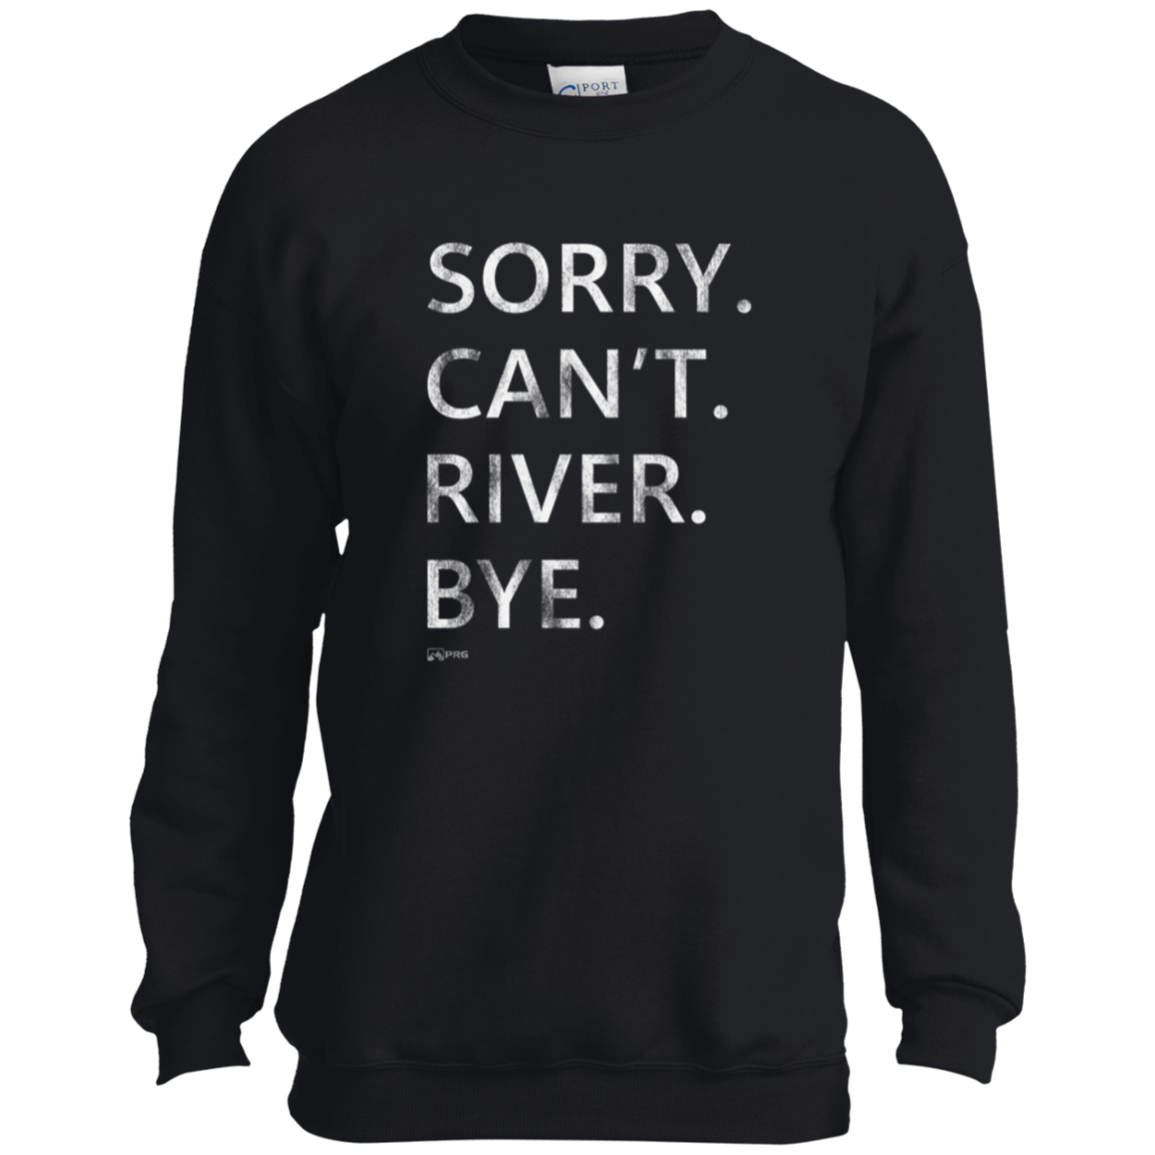 Sorry. Can't. River. Bye. - Youth Sweatshirt